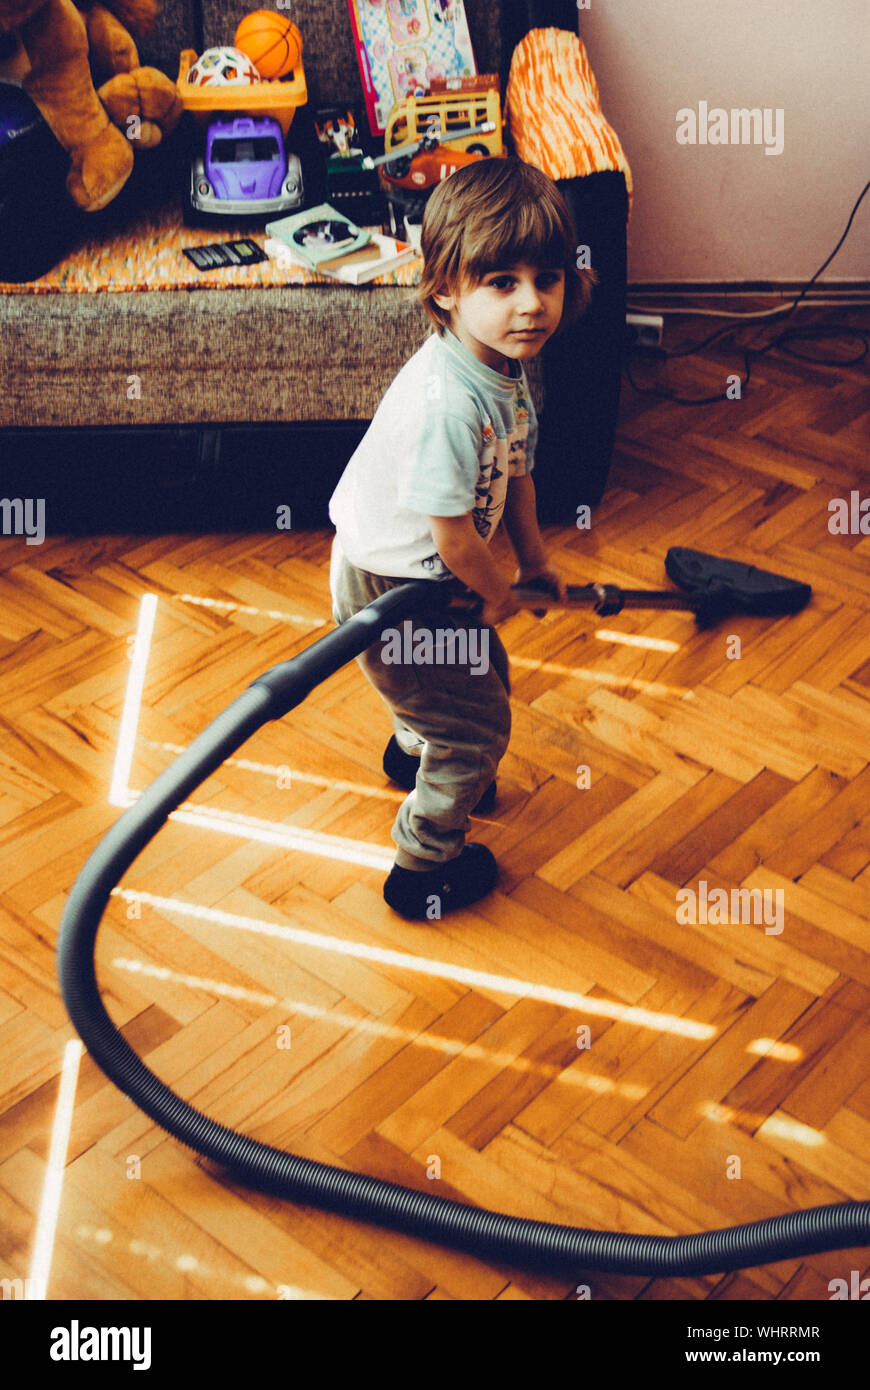 Full Length Portrait Of Boy Using Vacuum Cleaner On Floor At Home Stock Photo